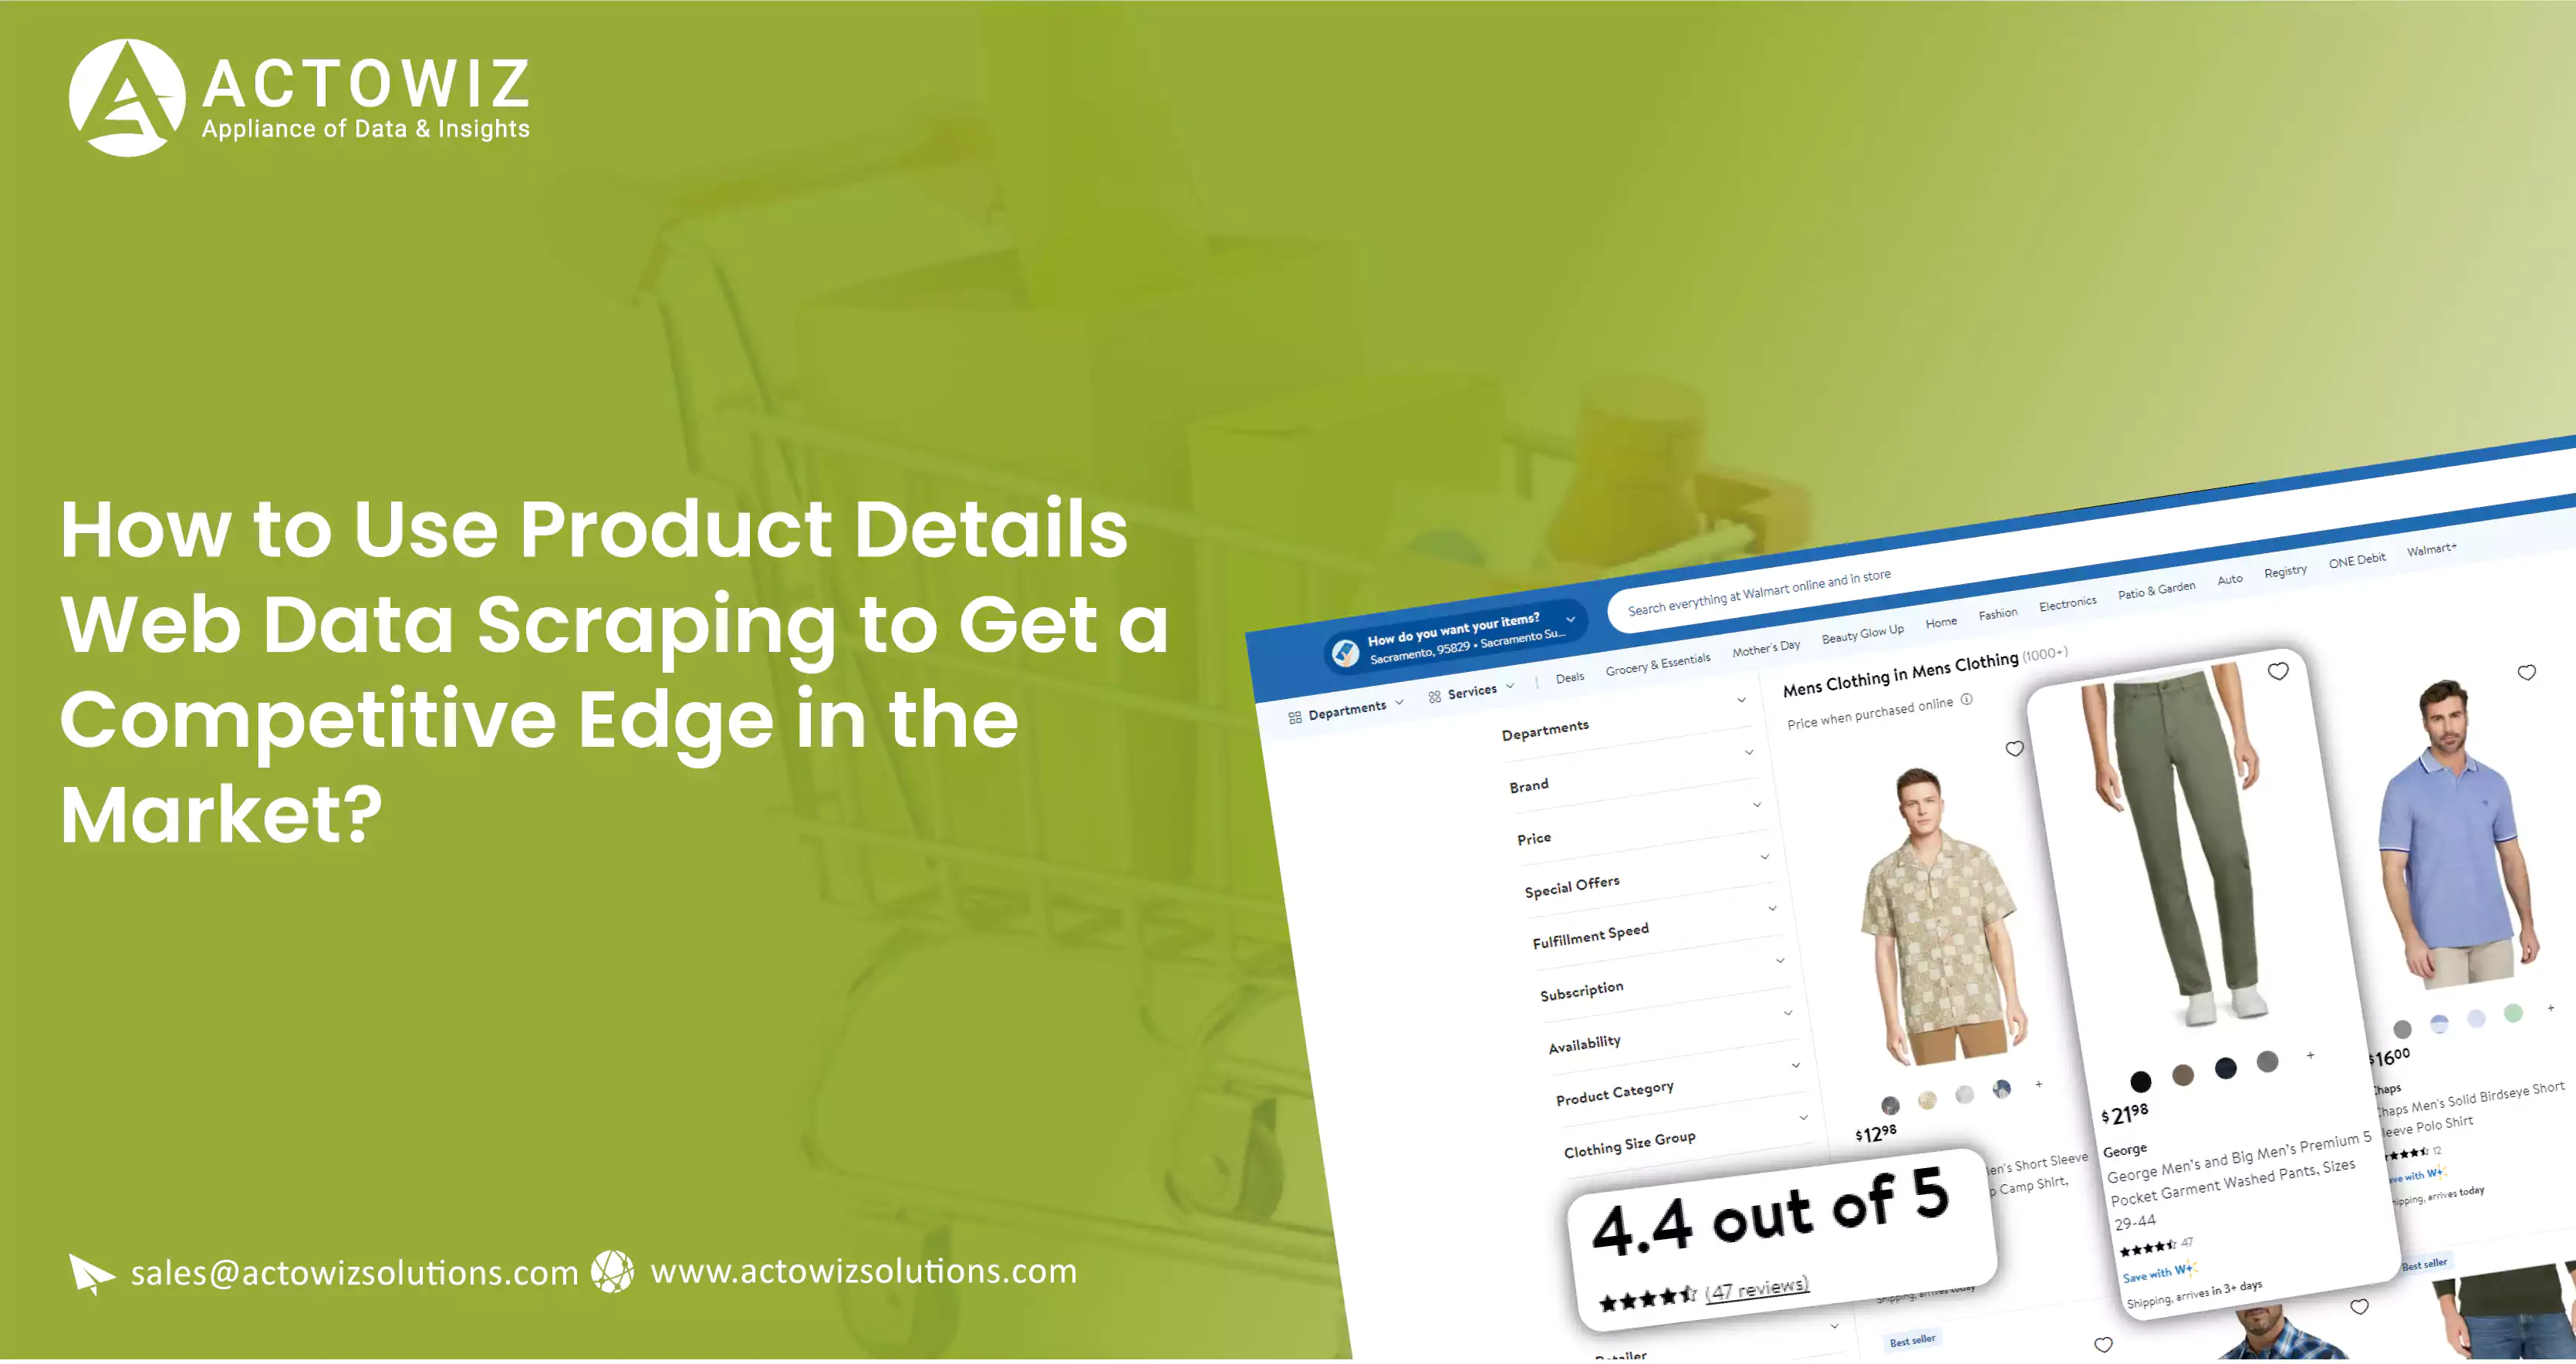 How to Use Product Details Web Data Scraping to Get a Competitive Edge in the Market